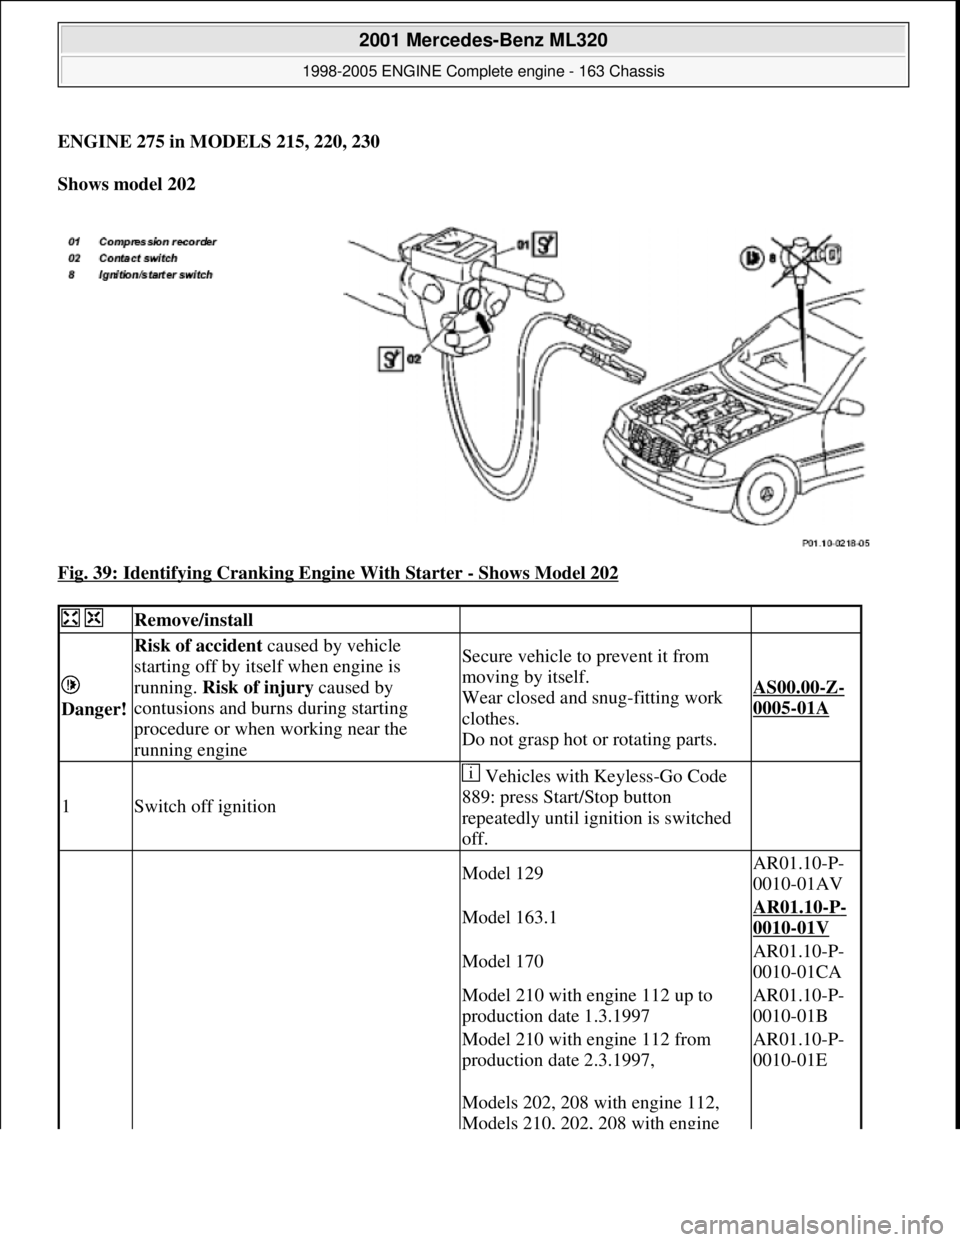 MERCEDES-BENZ ML320 1997  Complete Repair Manual ENGINE 275 in MODELS 215, 220, 230    
Shows model 202     
Fig. 39: Identifying Cranking Engine With Starter 
- Shows Model 202 
  Remove/install  
  
Danger!   
Risk of accident  caused by vehicle  